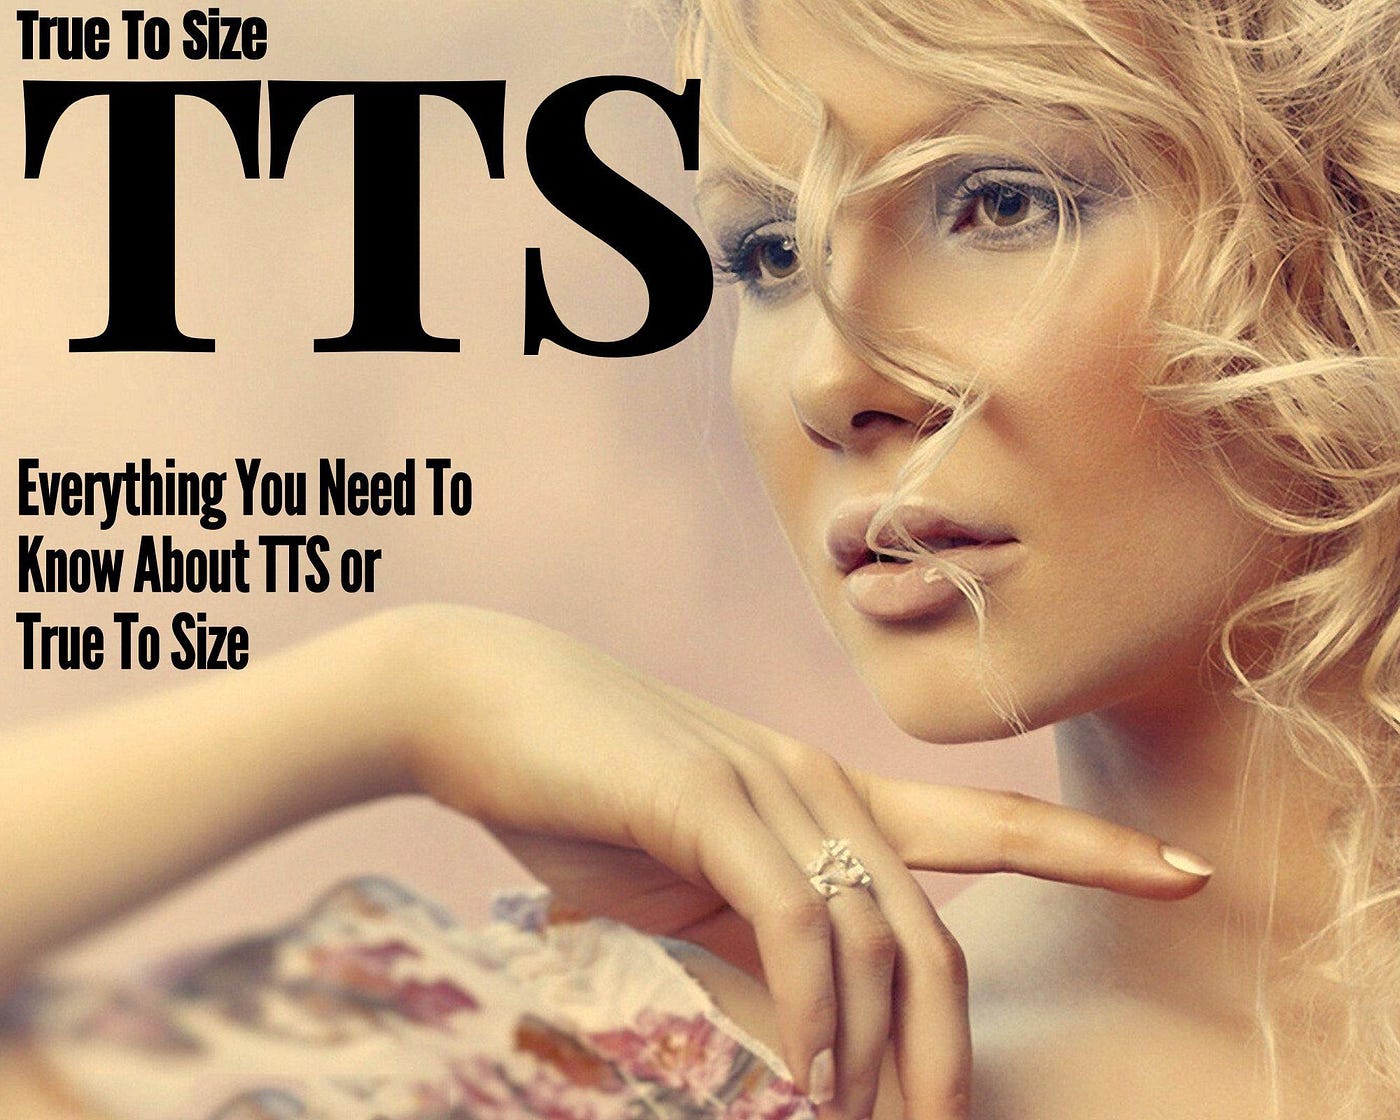 Everything You Need To Know About True To Size or TTS